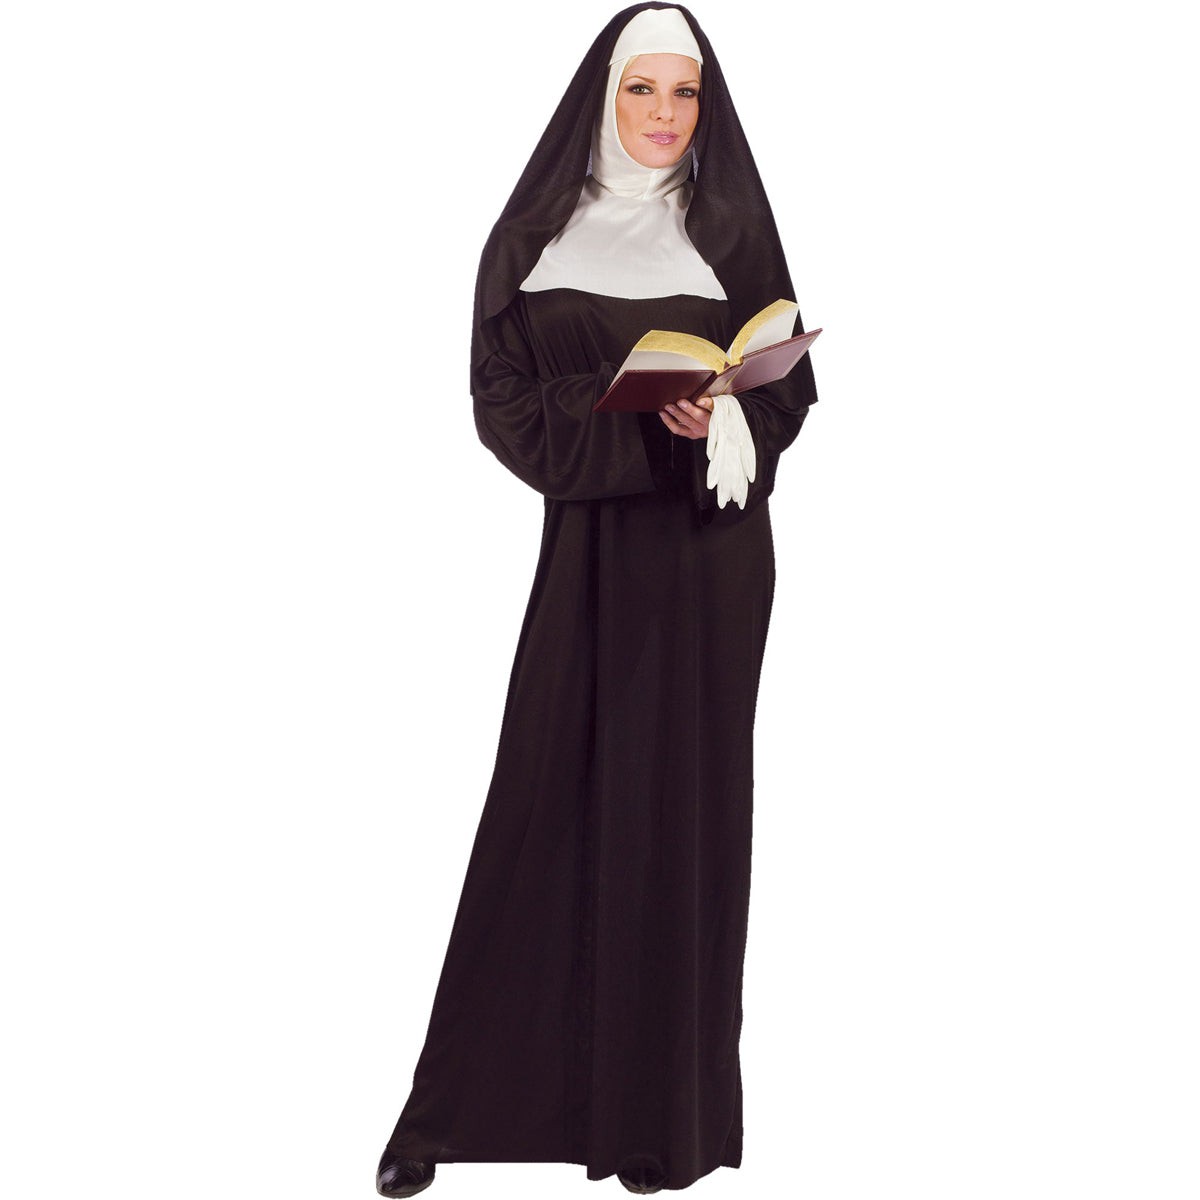 FUN WORLD Costumes Mother Superior Costume for Adults 023168011060